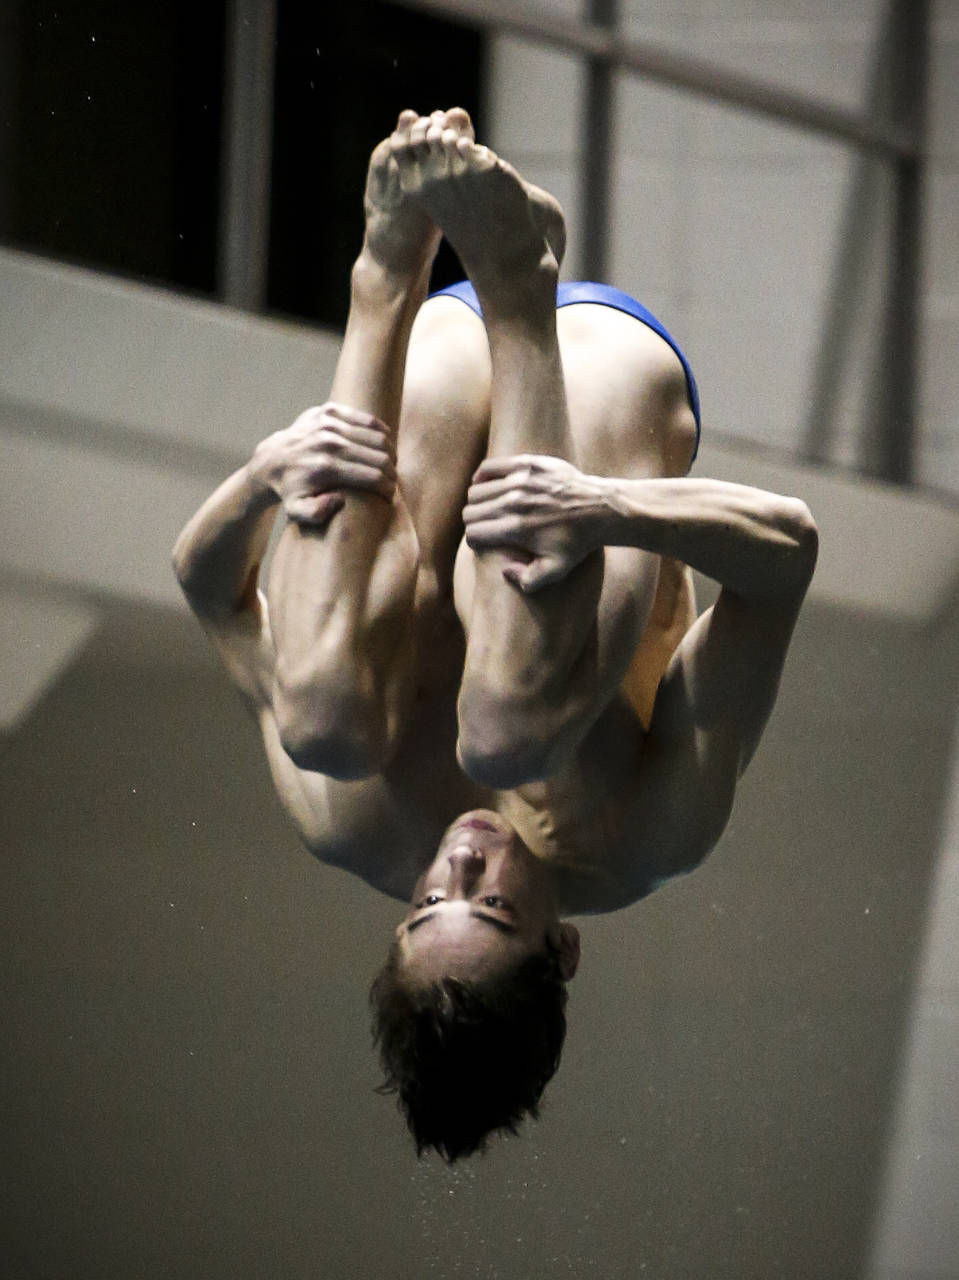 Shorewood junior Isaac Poole, last year’s Class 3A state runner-up, enters the state diving meet as the No. 2 seed in his classification. (Ian Terry / The Herald)